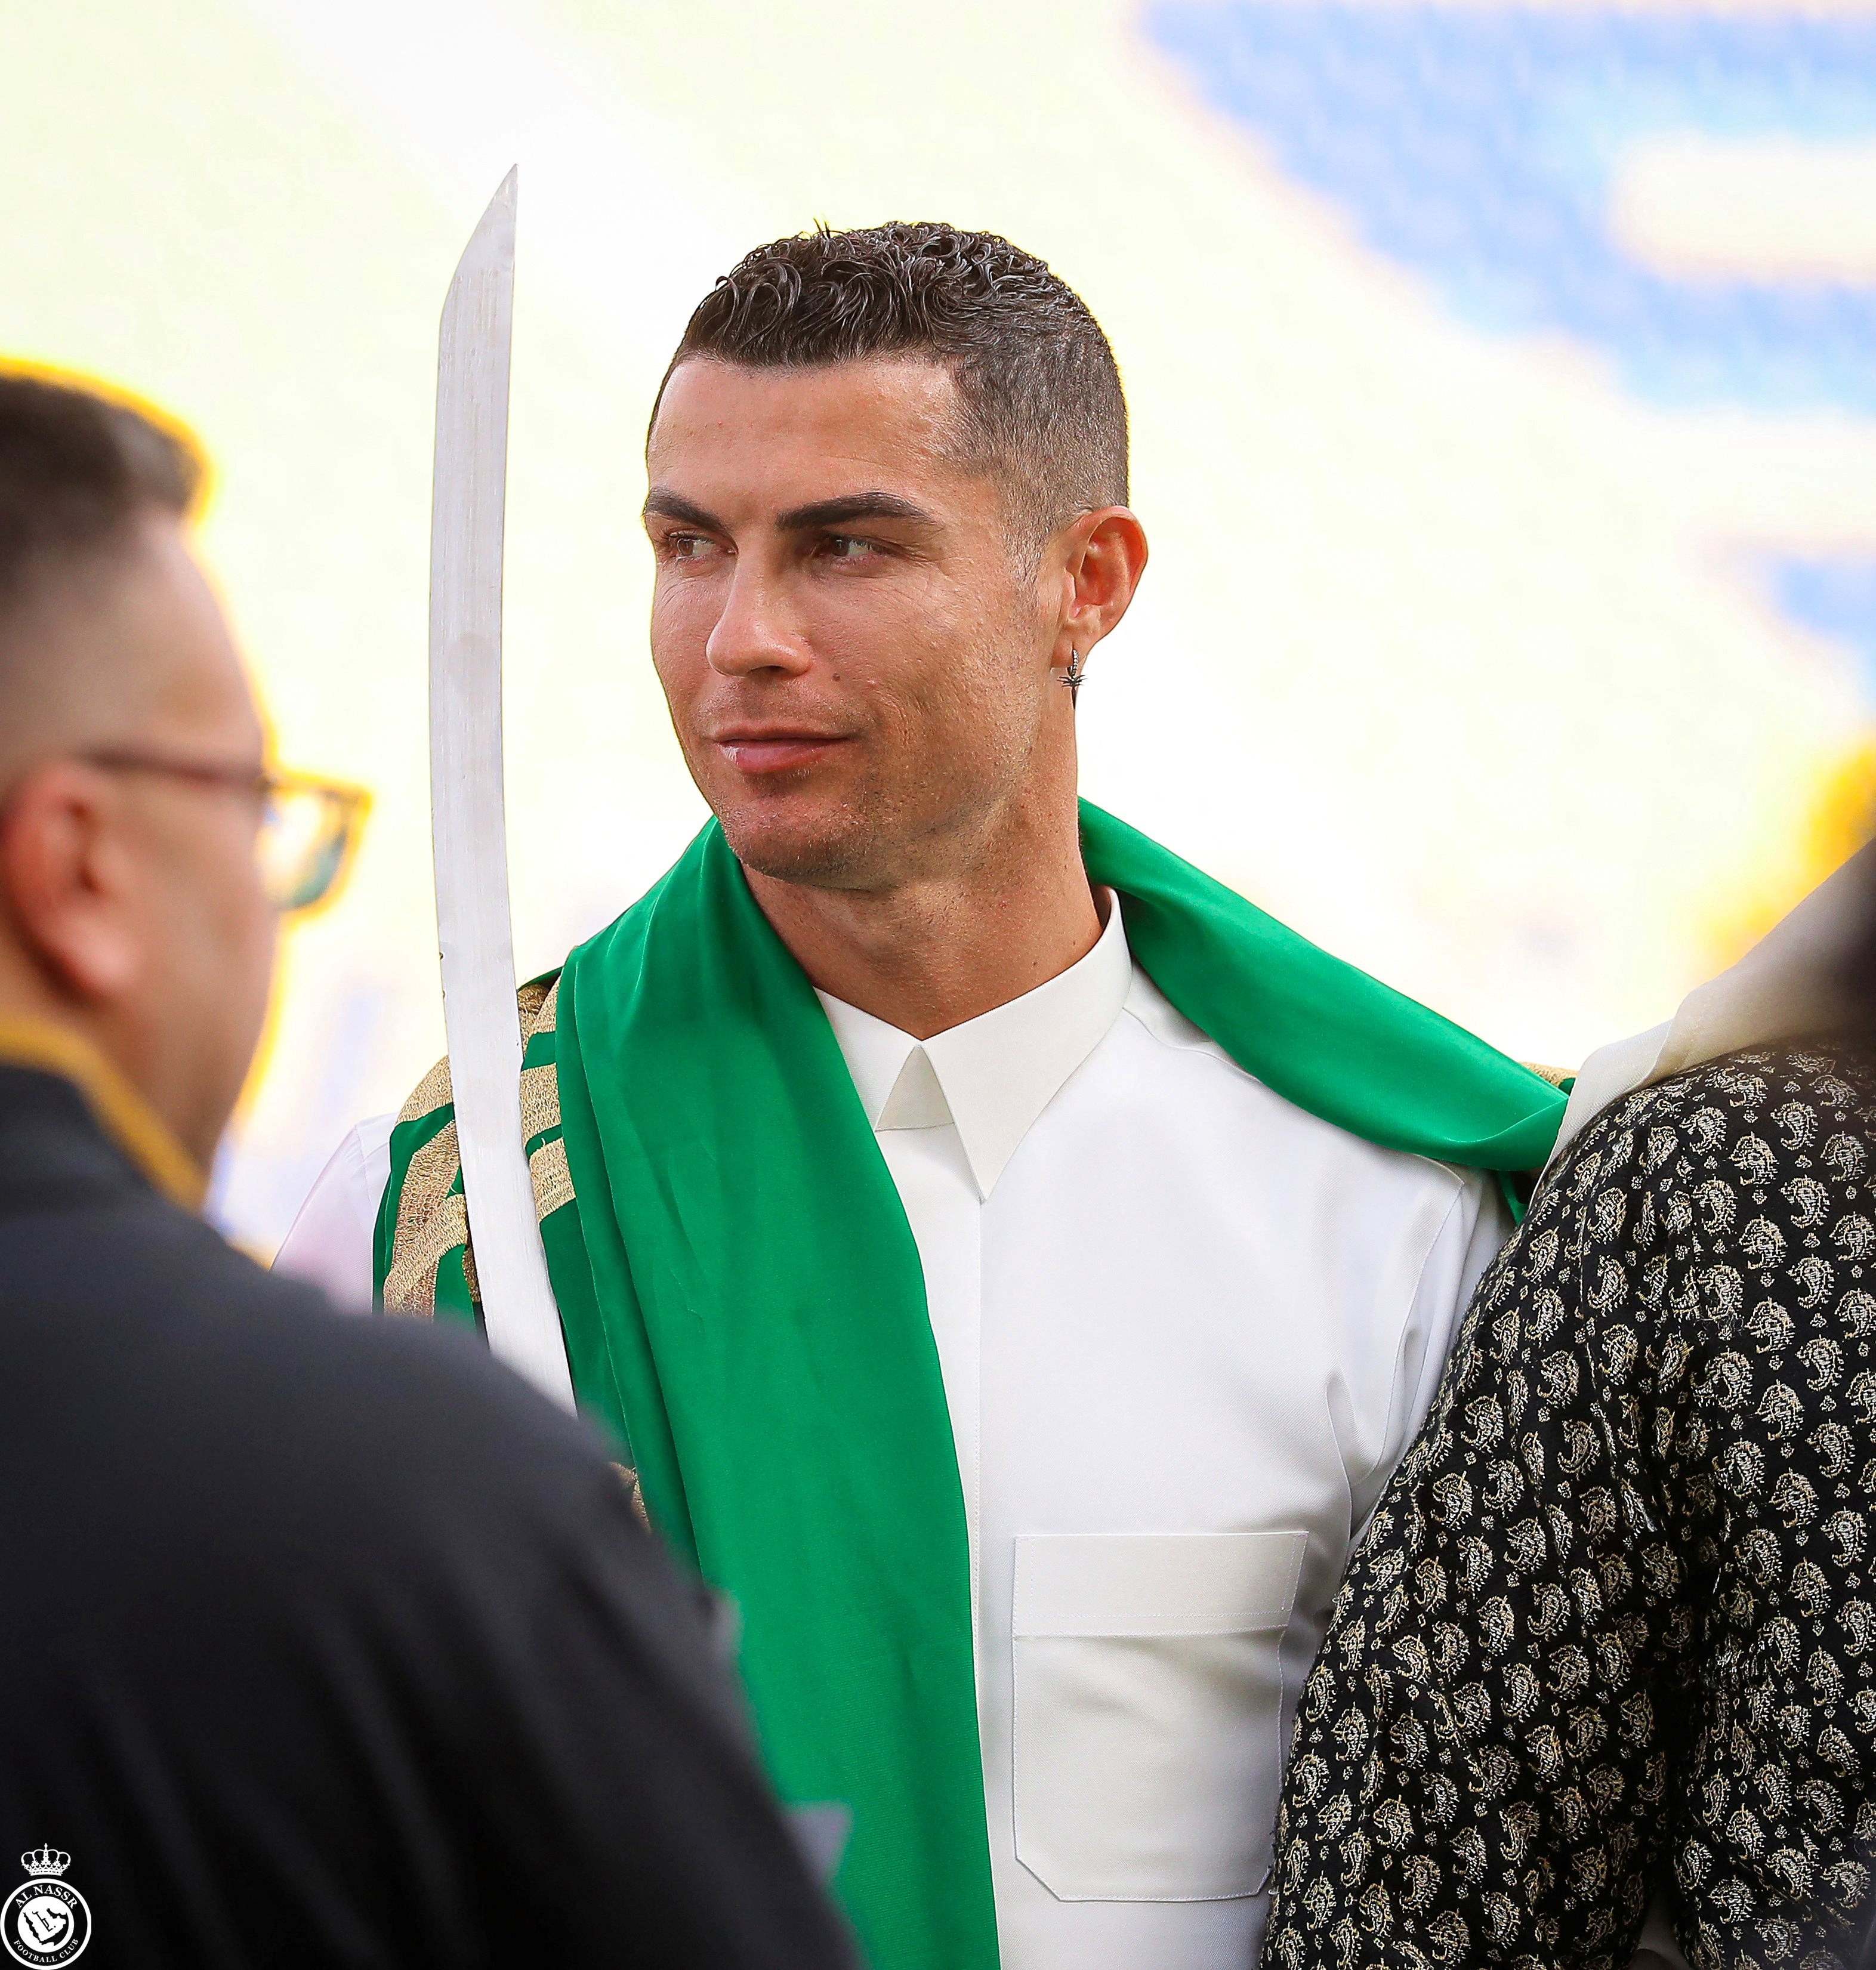 Cristiano Ronaldo celebrates Saudi Arabia's Founding Day with Al-Nassr, donning a sword and traditional garb in the process